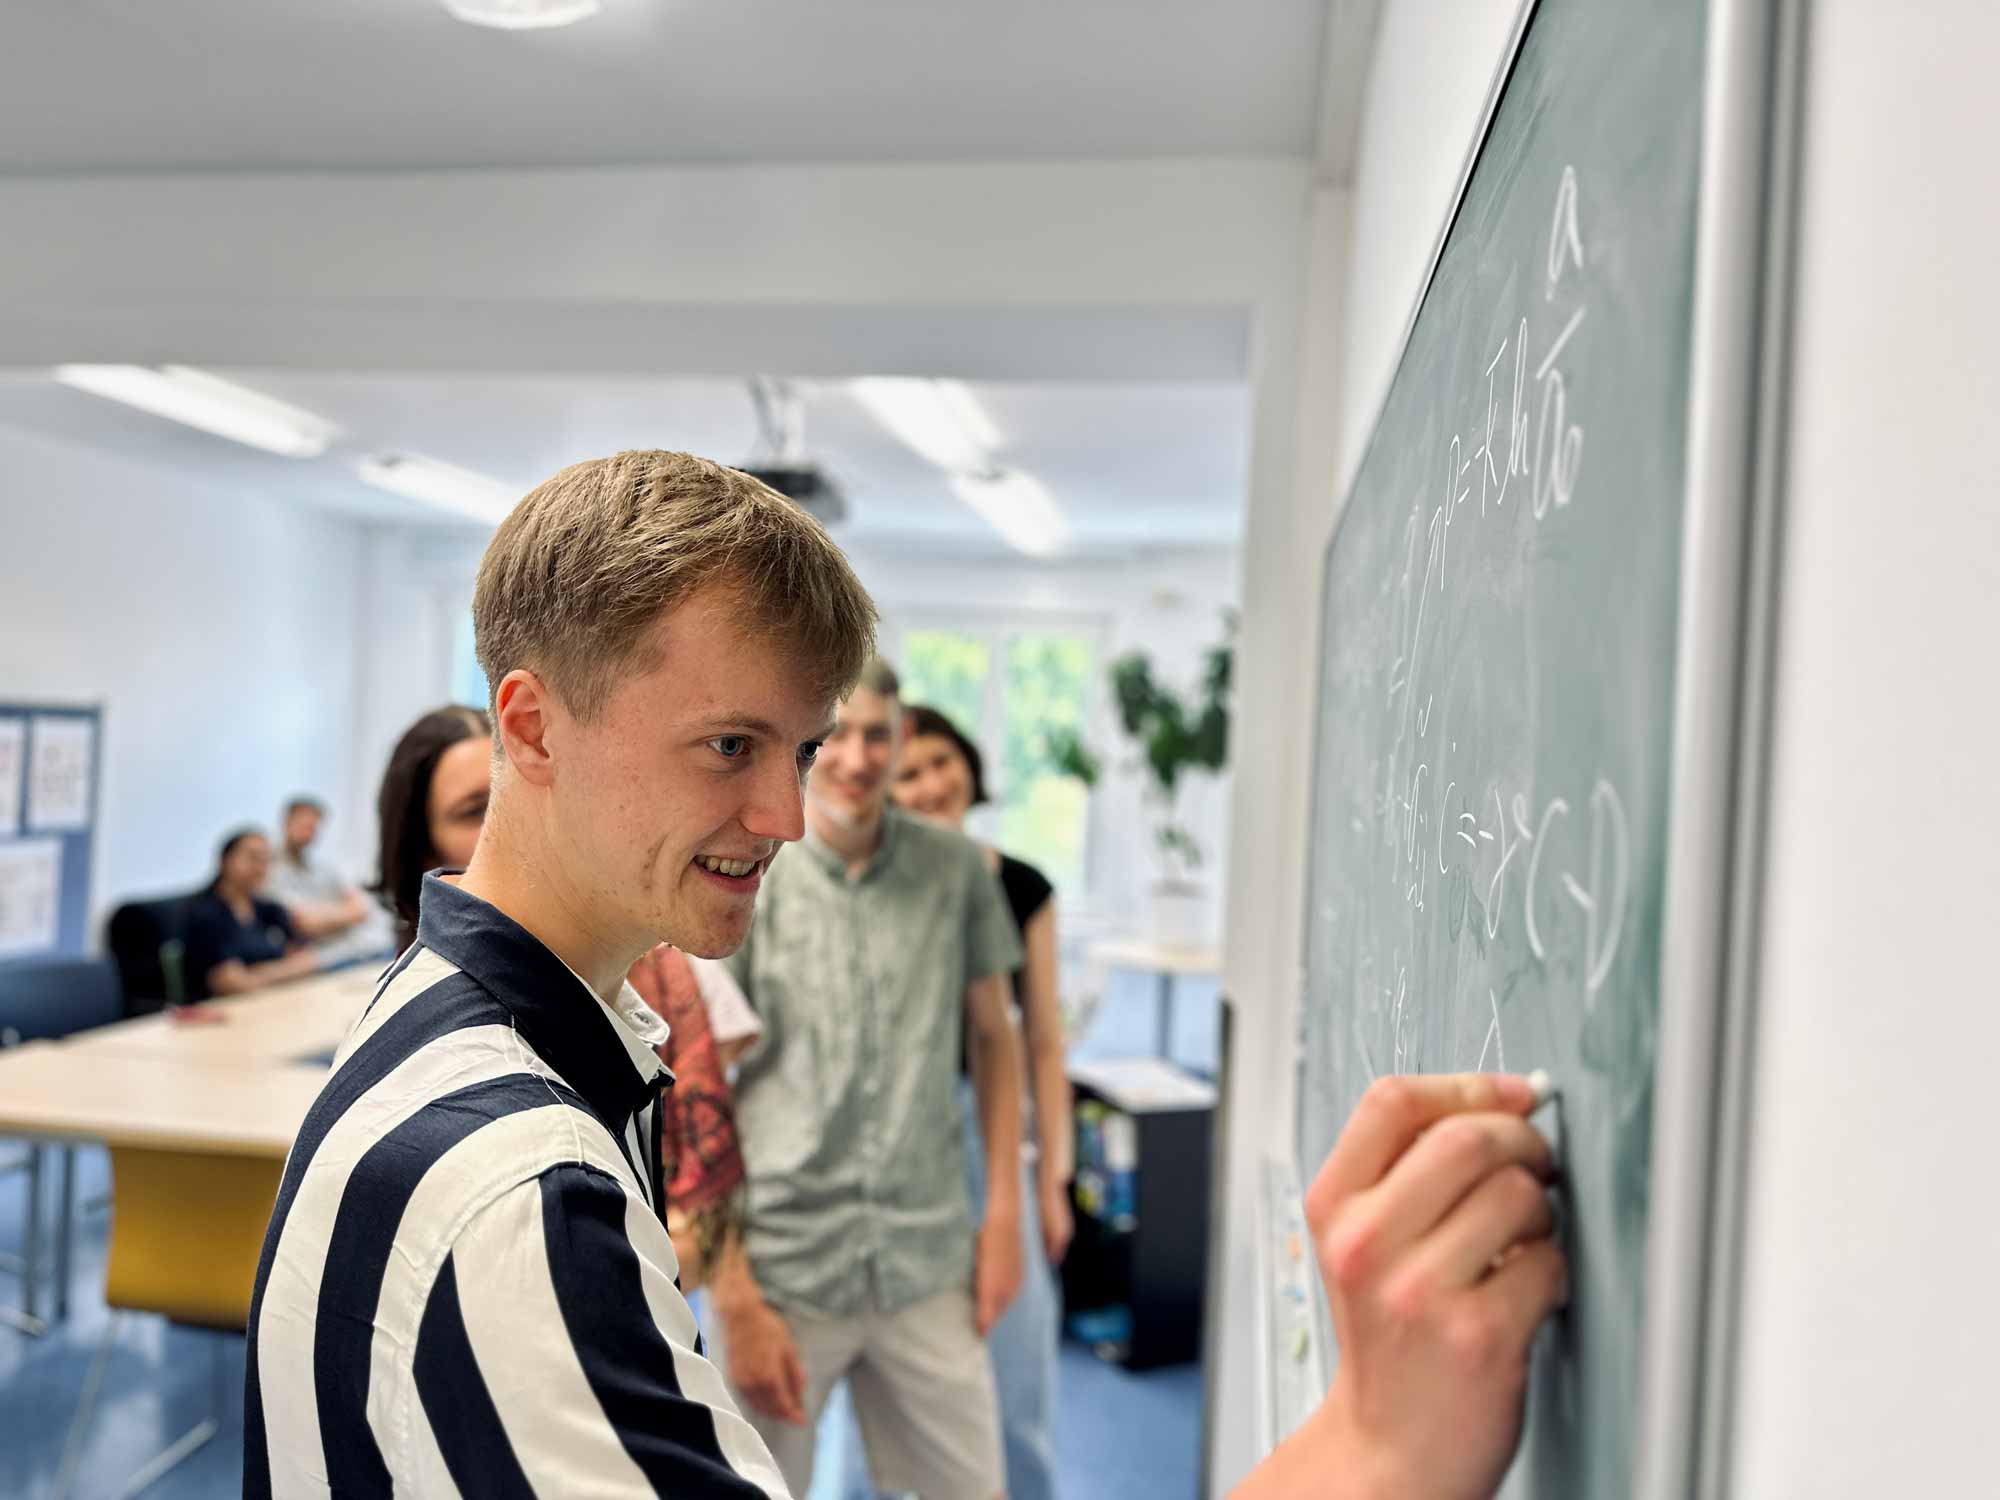 Students in front of a blackboard, one of them writing on it